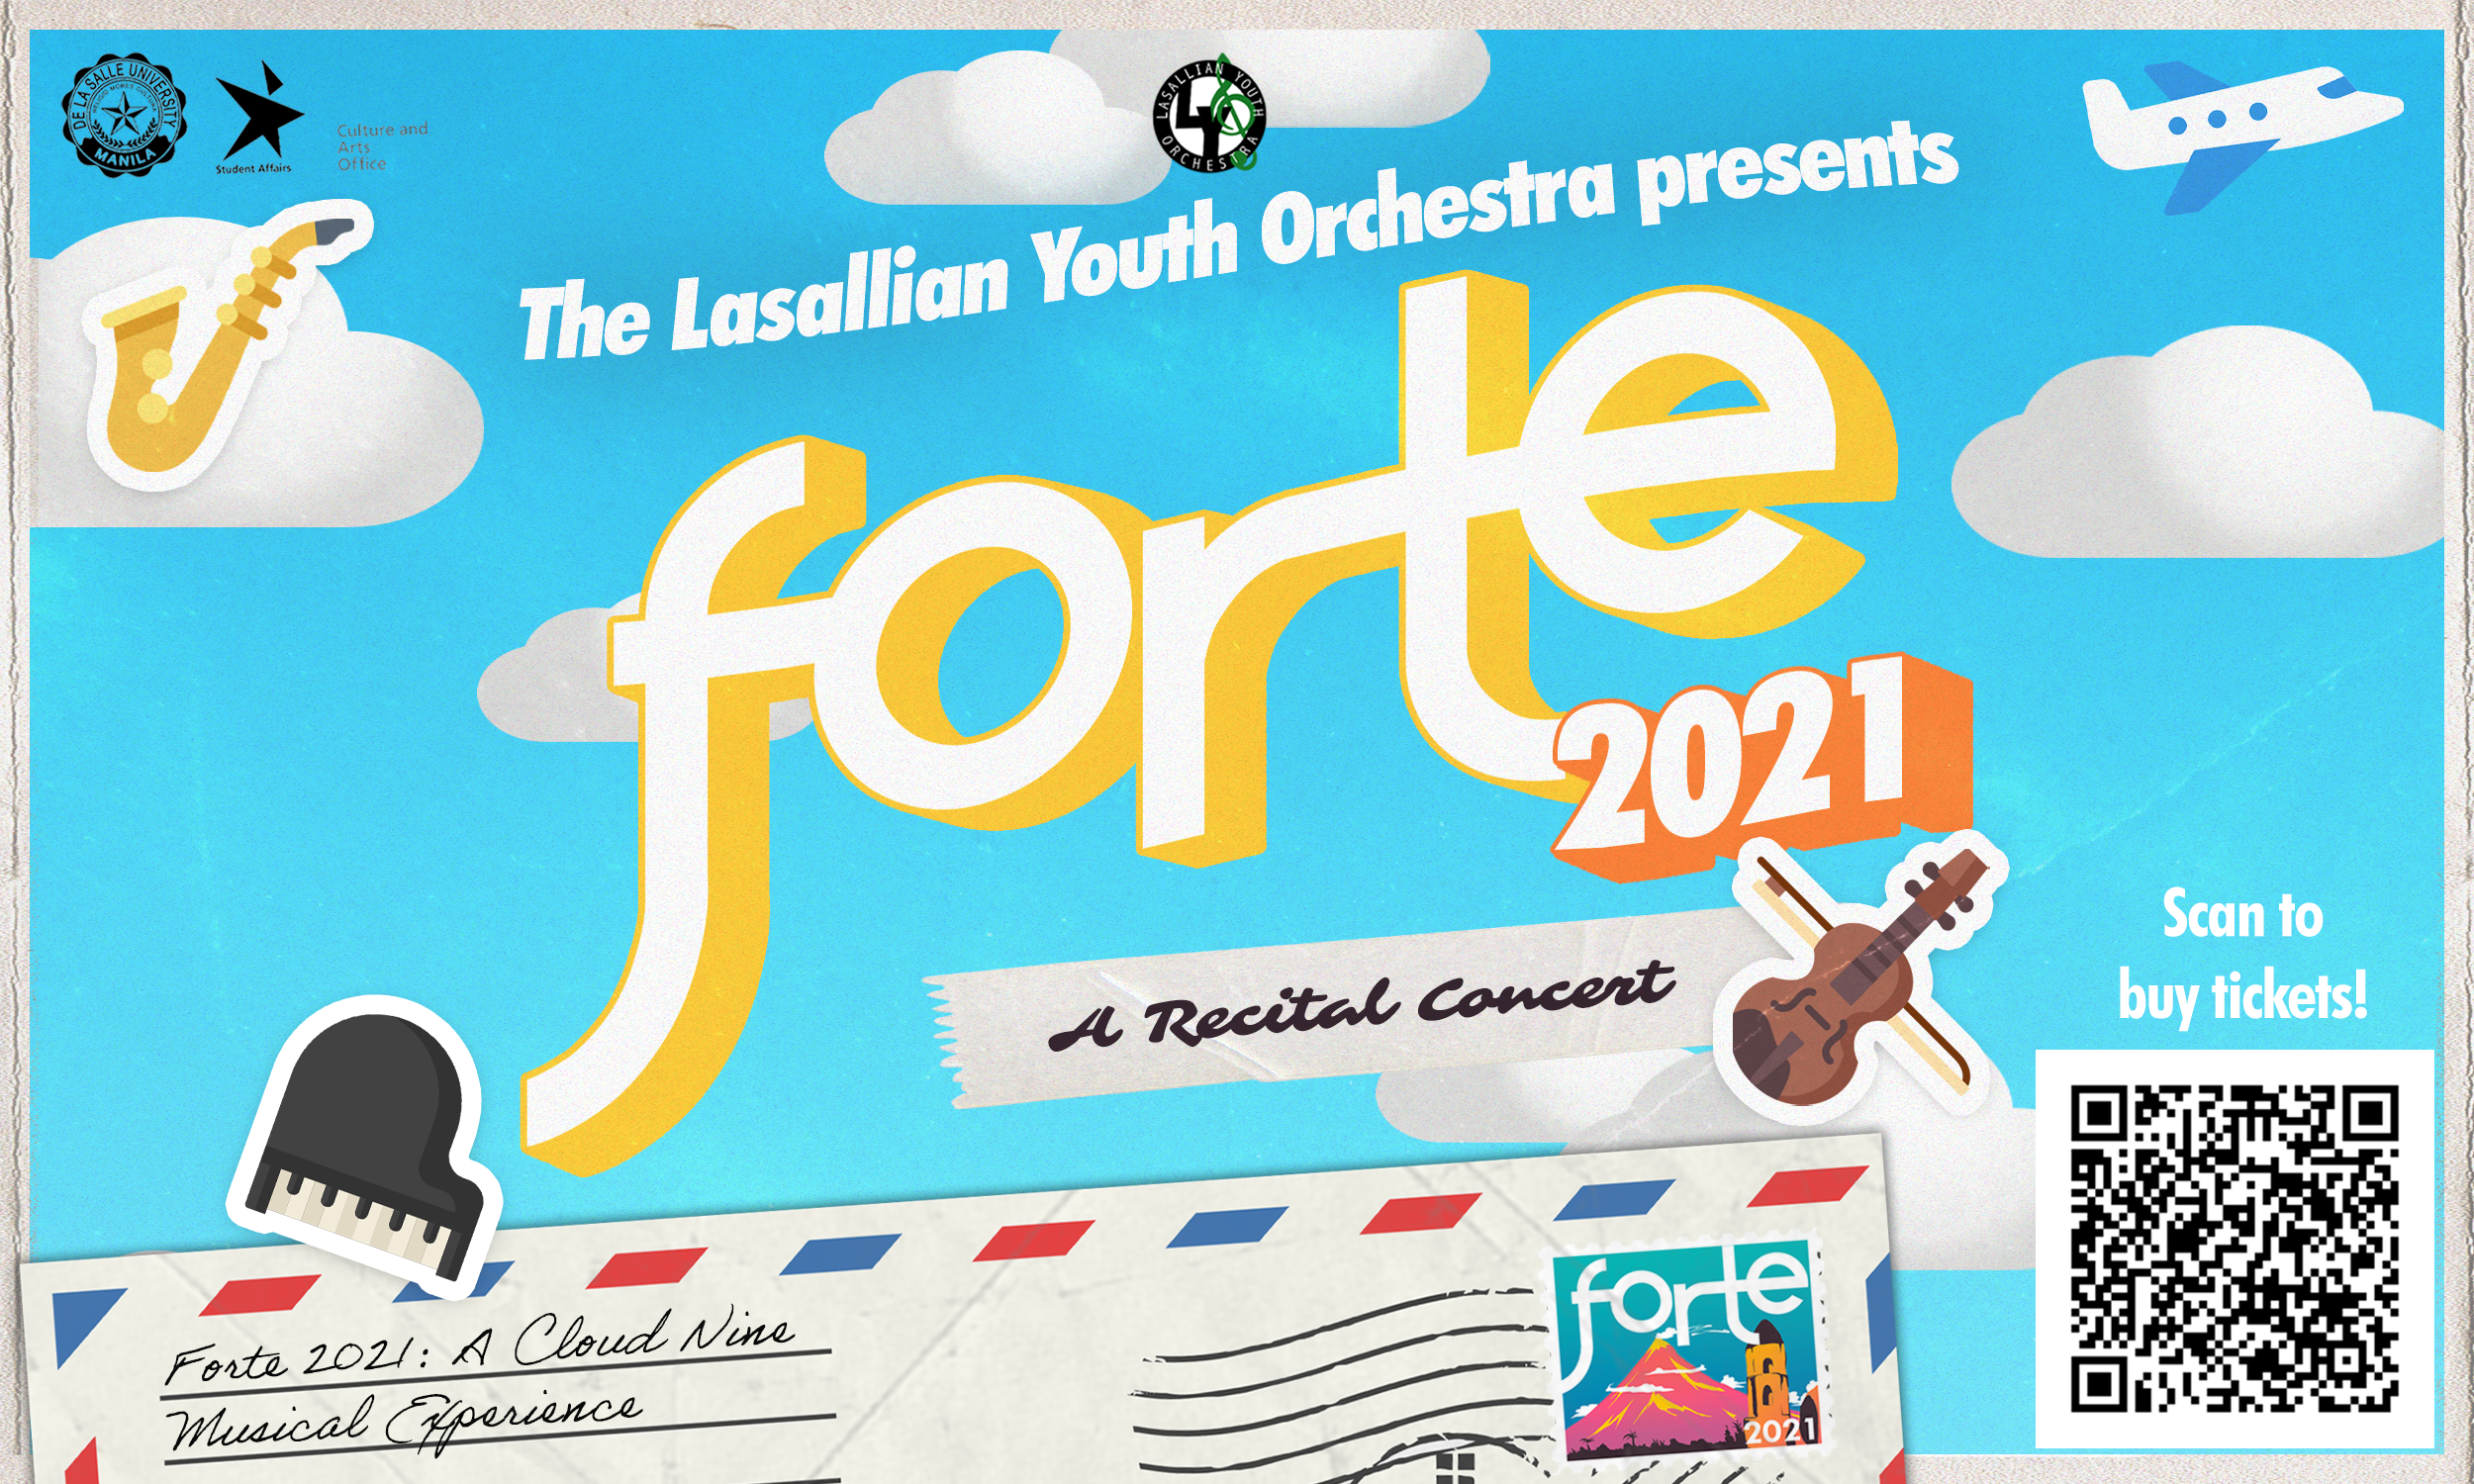 Cover Photo Courtesy Of Lasallian Youth Orchestra